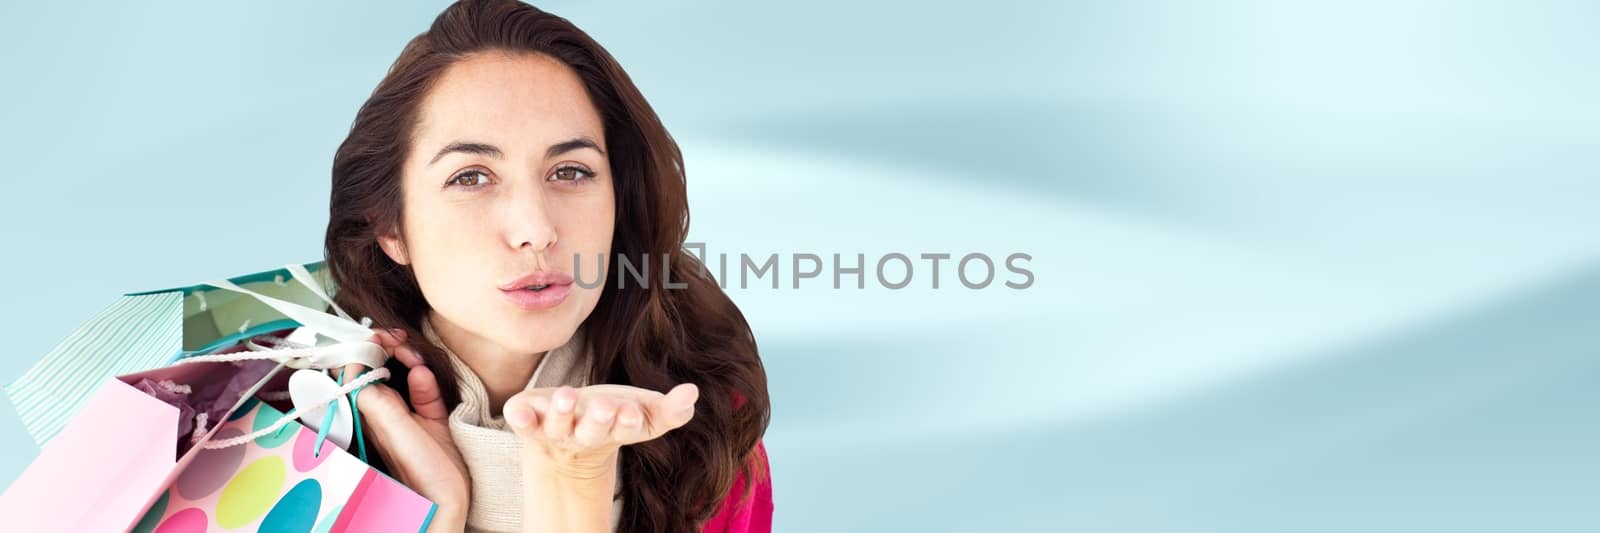 Shopper with bags and blowing kiss against blurry blue abstract background by Wavebreakmedia